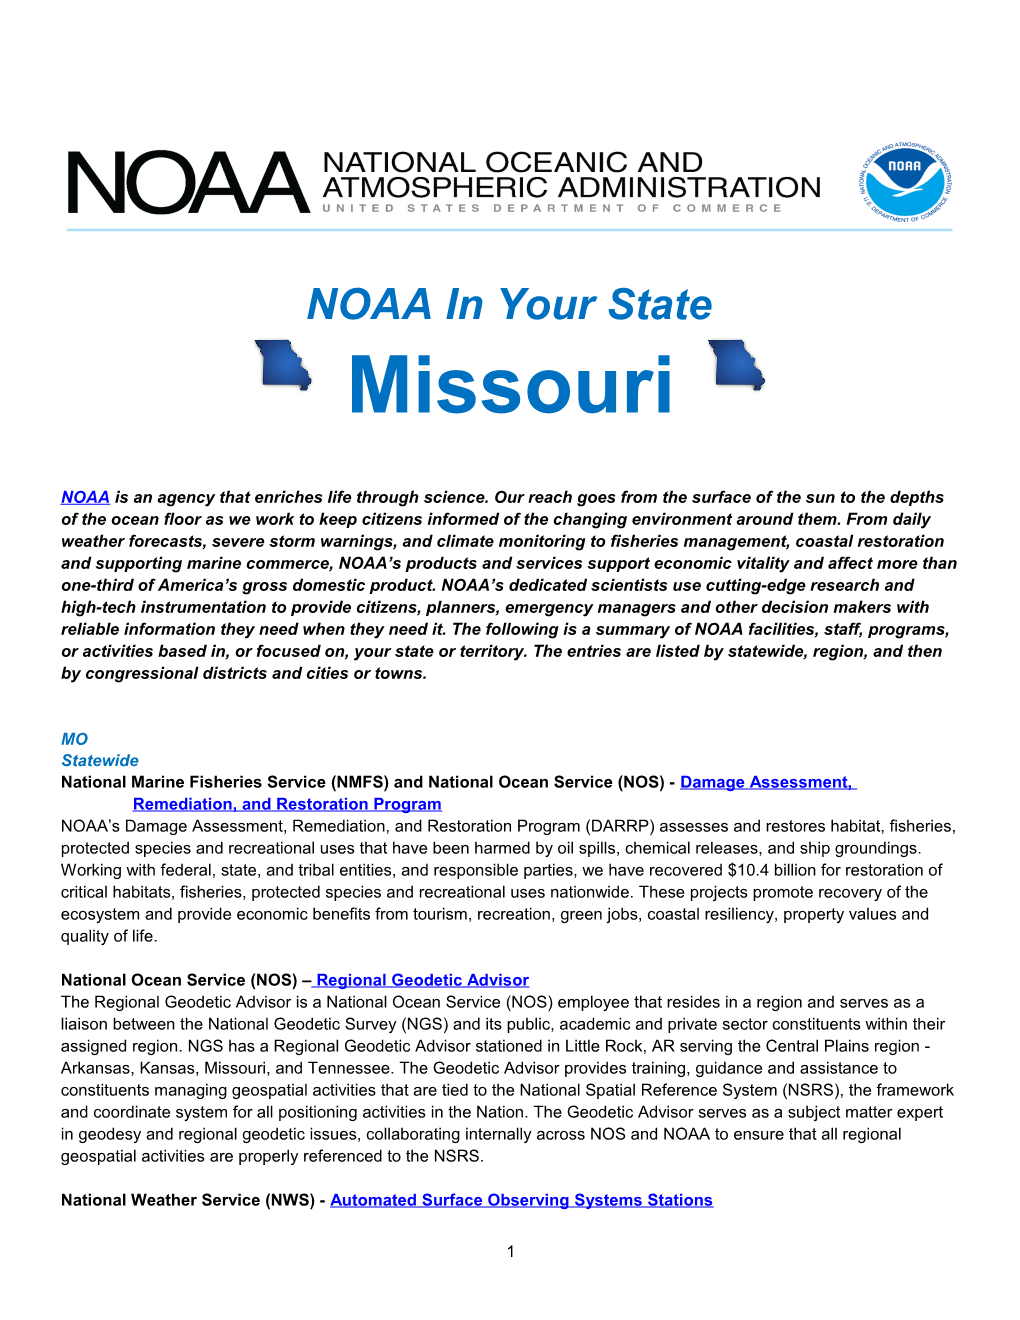 NOAA in Your State - Missouri